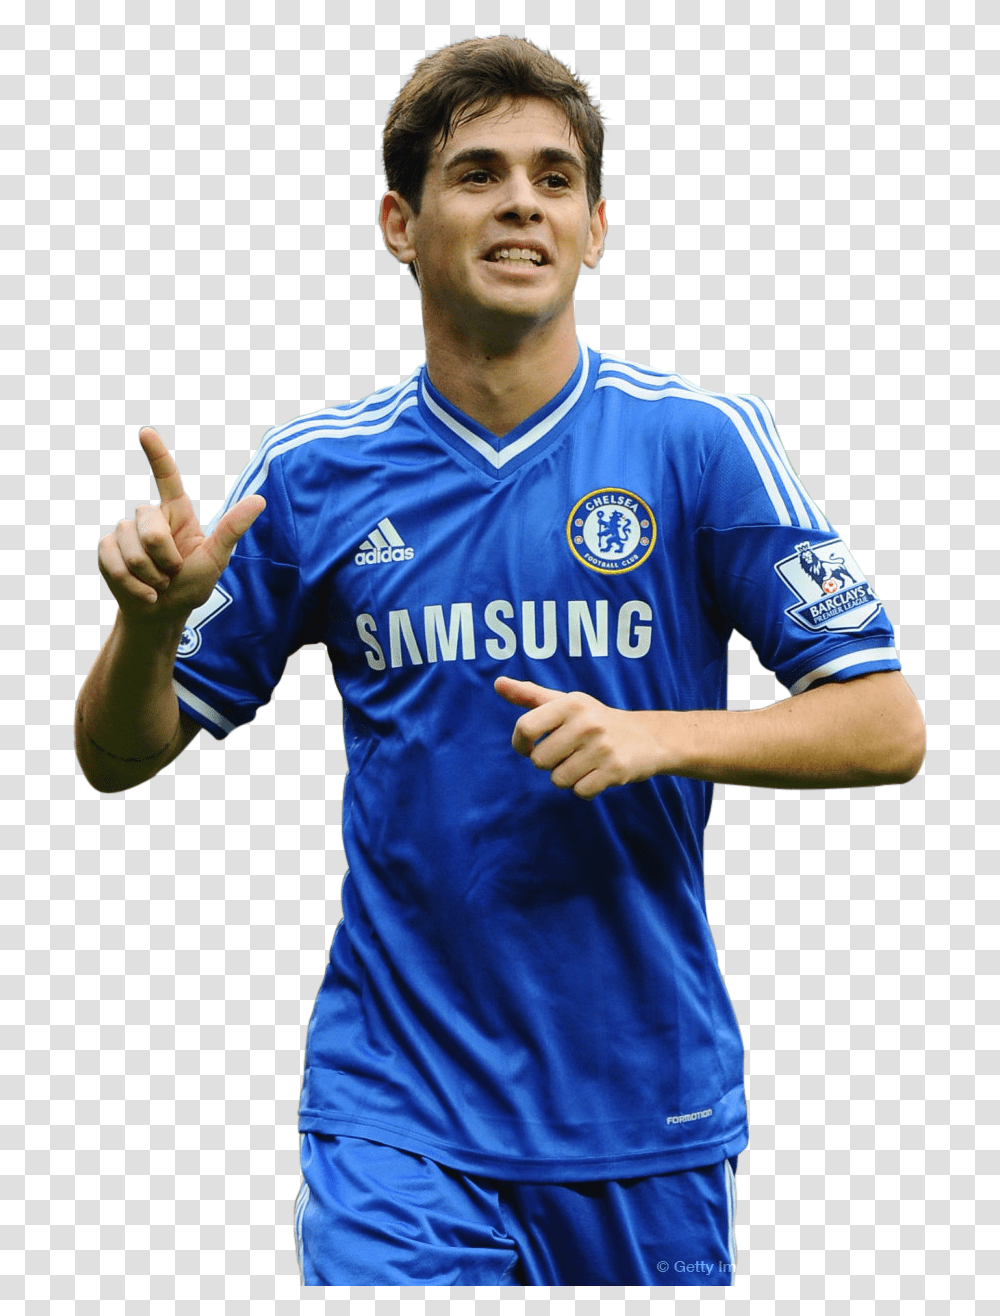 Chelsea Fc Football Renders Chelsea, Clothing, Apparel, Person, Shirt Transparent Png